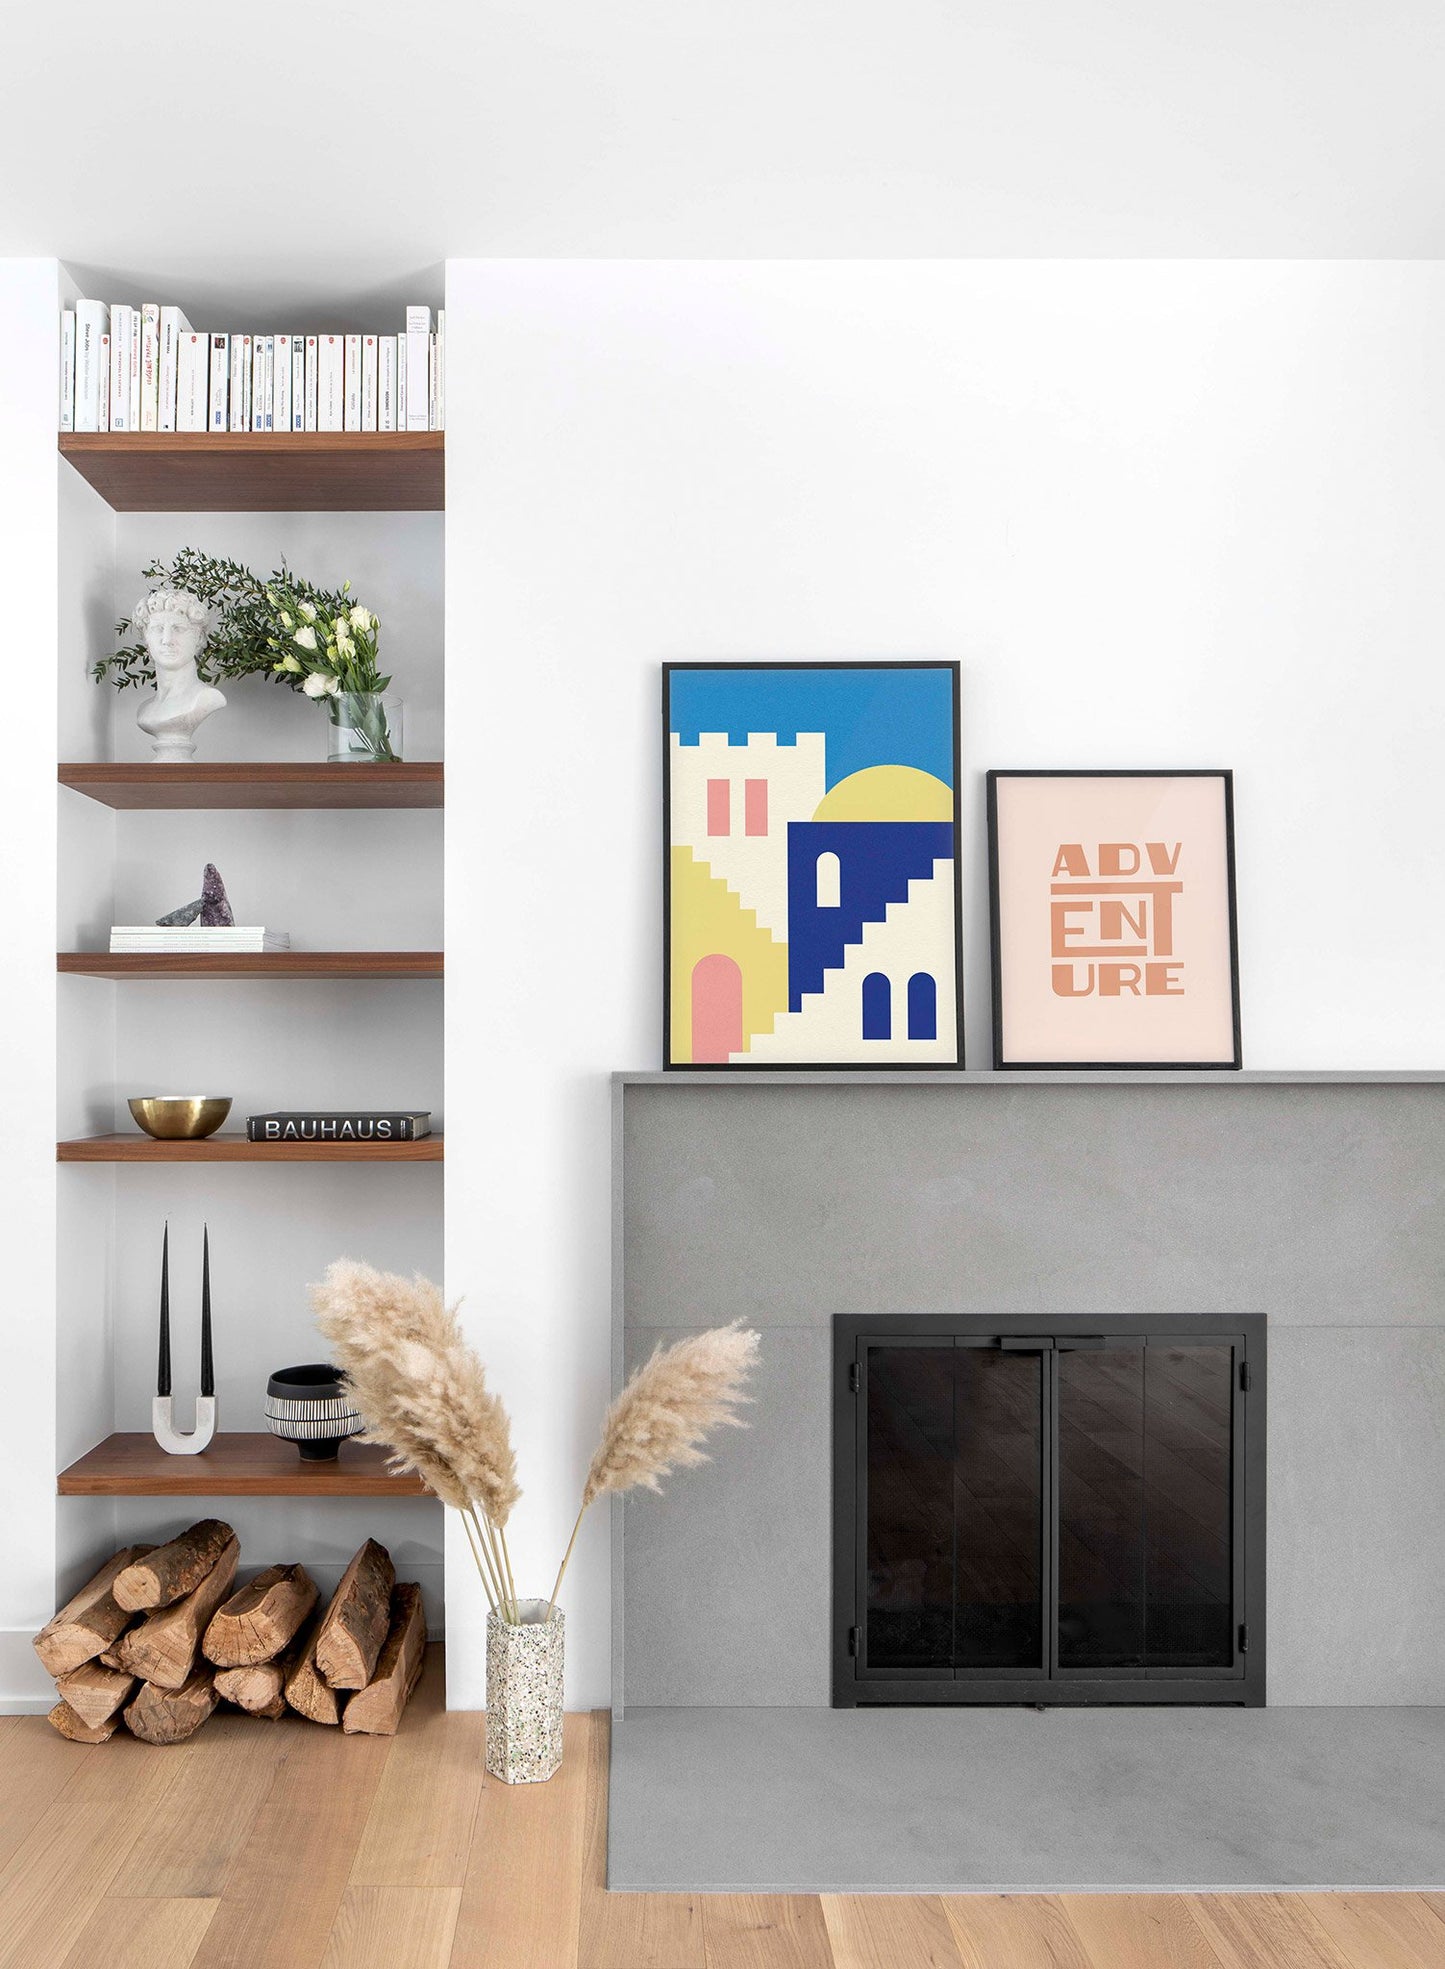 Minimalist pop art paper illustration by German artist Rosi Feist with stairs and architecture of Morocco - Lifestyle Duo - Living Room